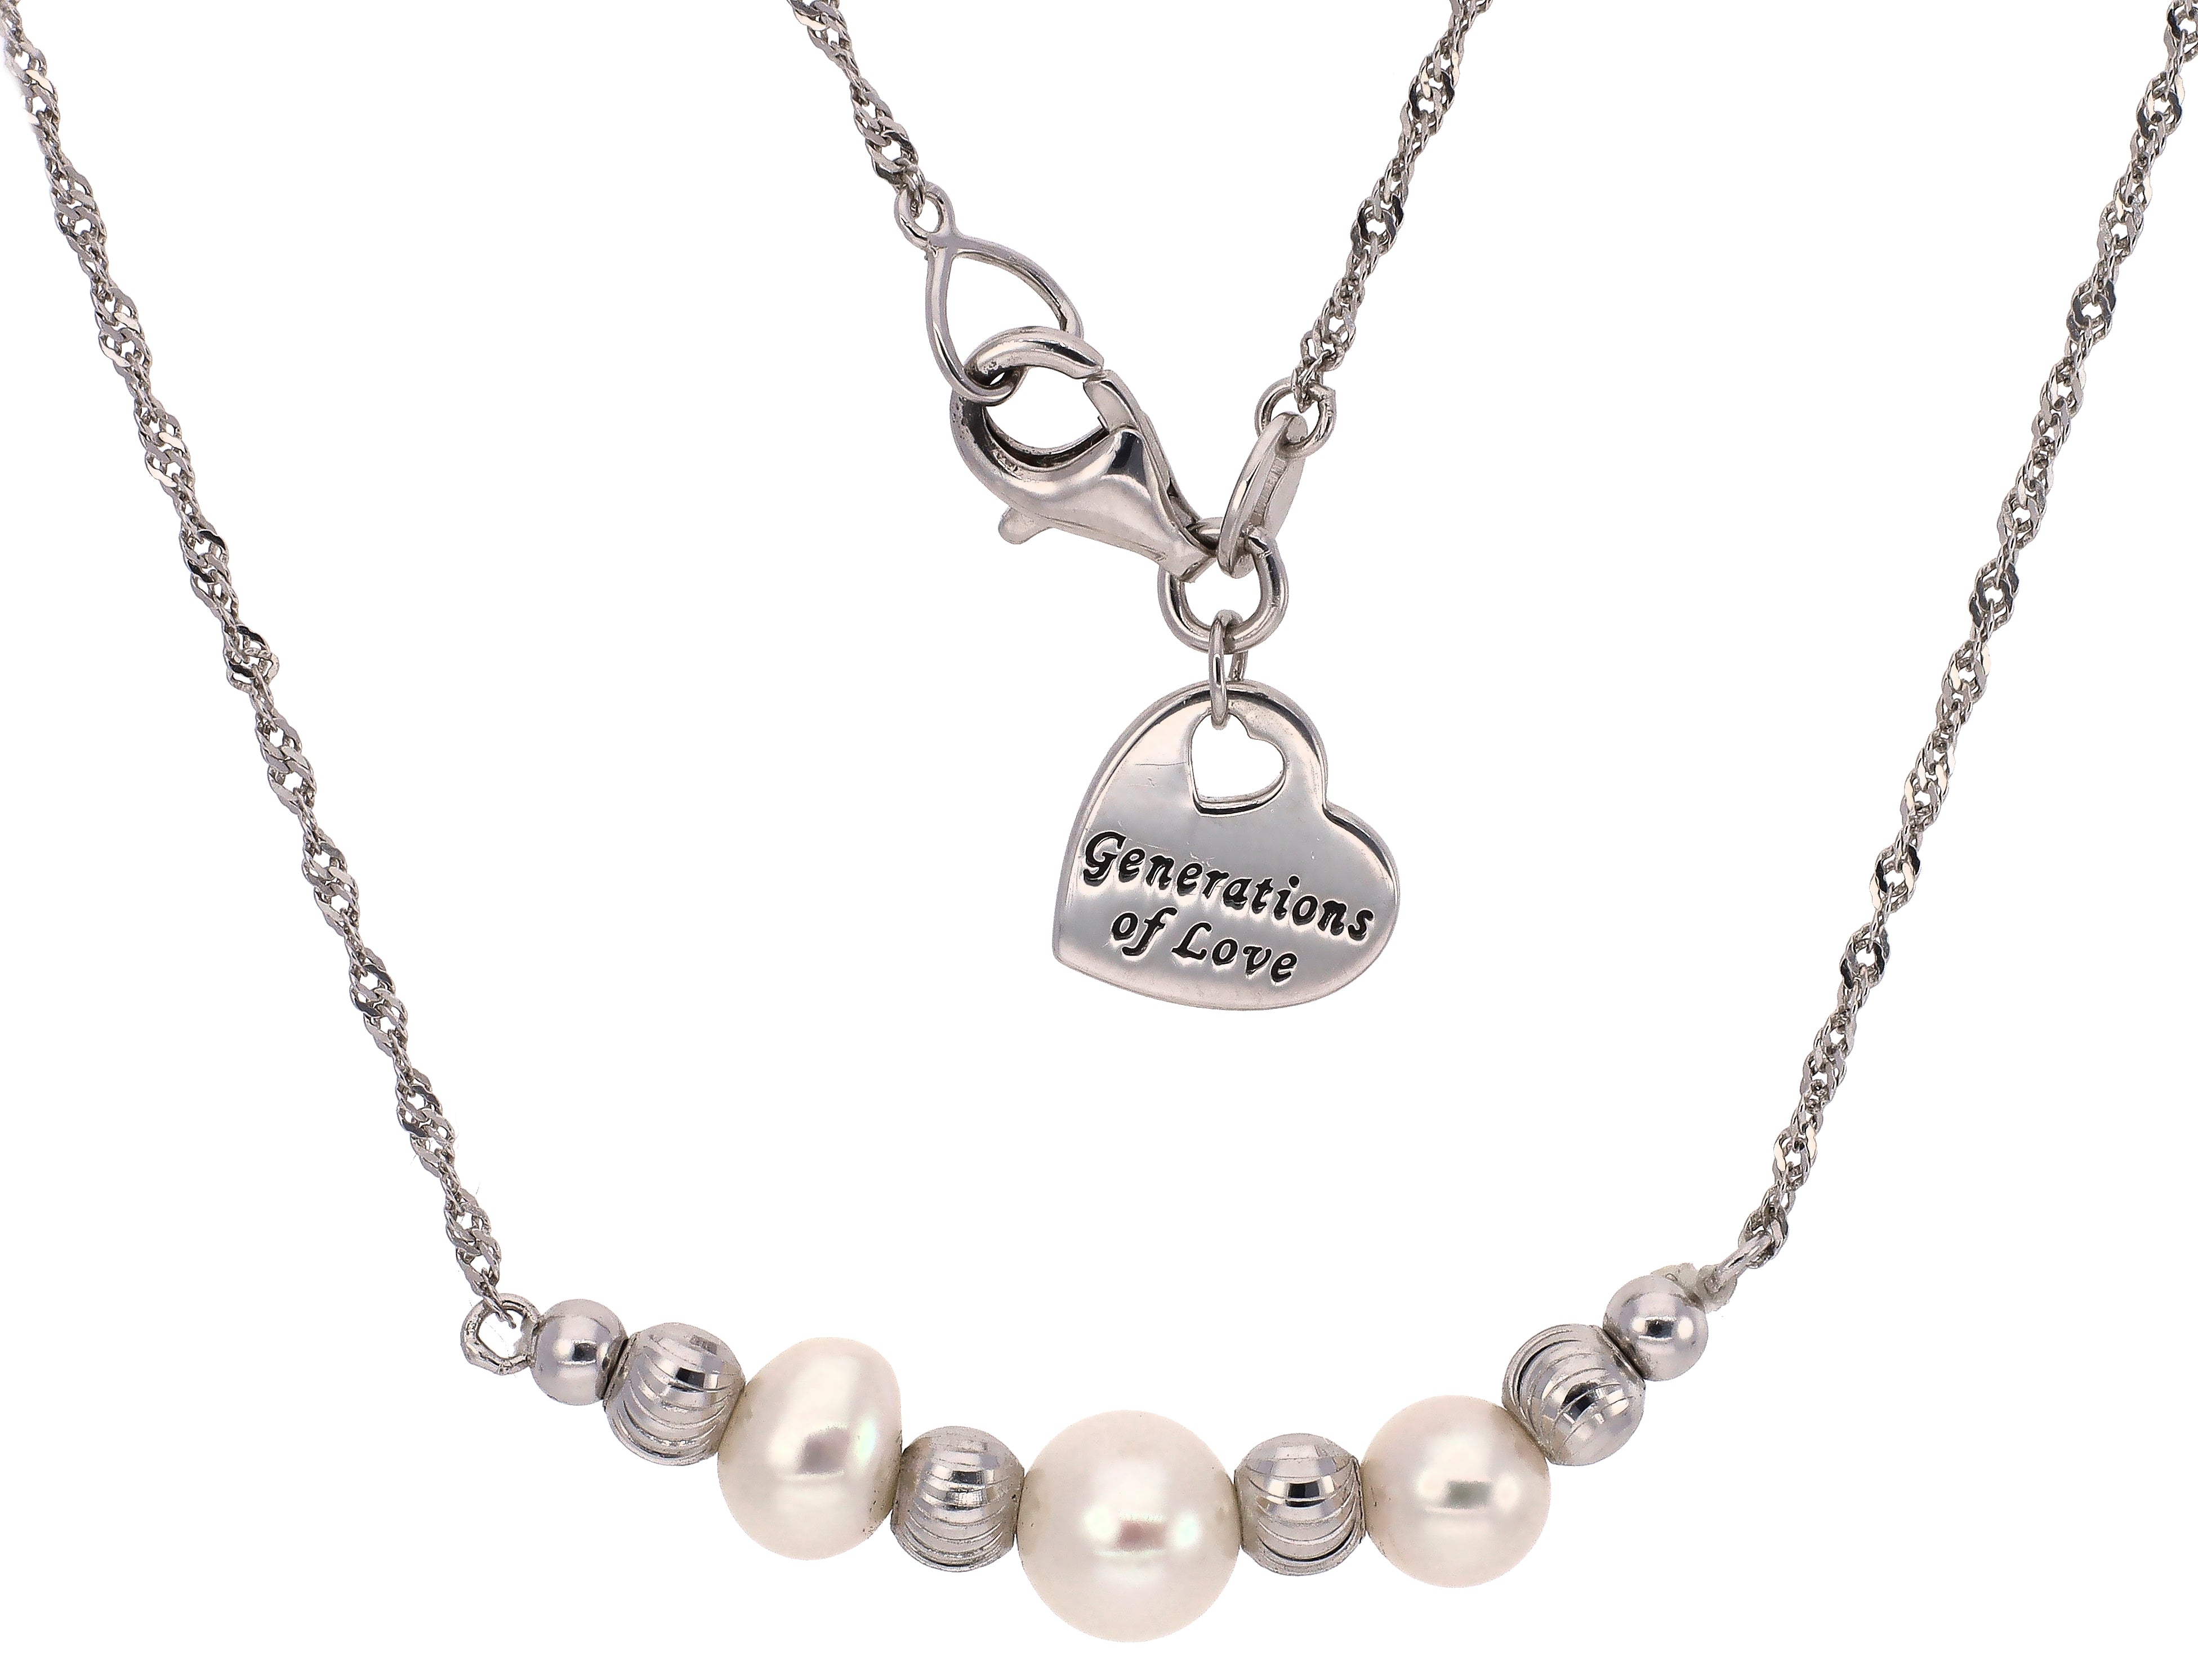 "Generations Of Love" Sterling Silver Genuine Cultured Pearl Necklace 18"